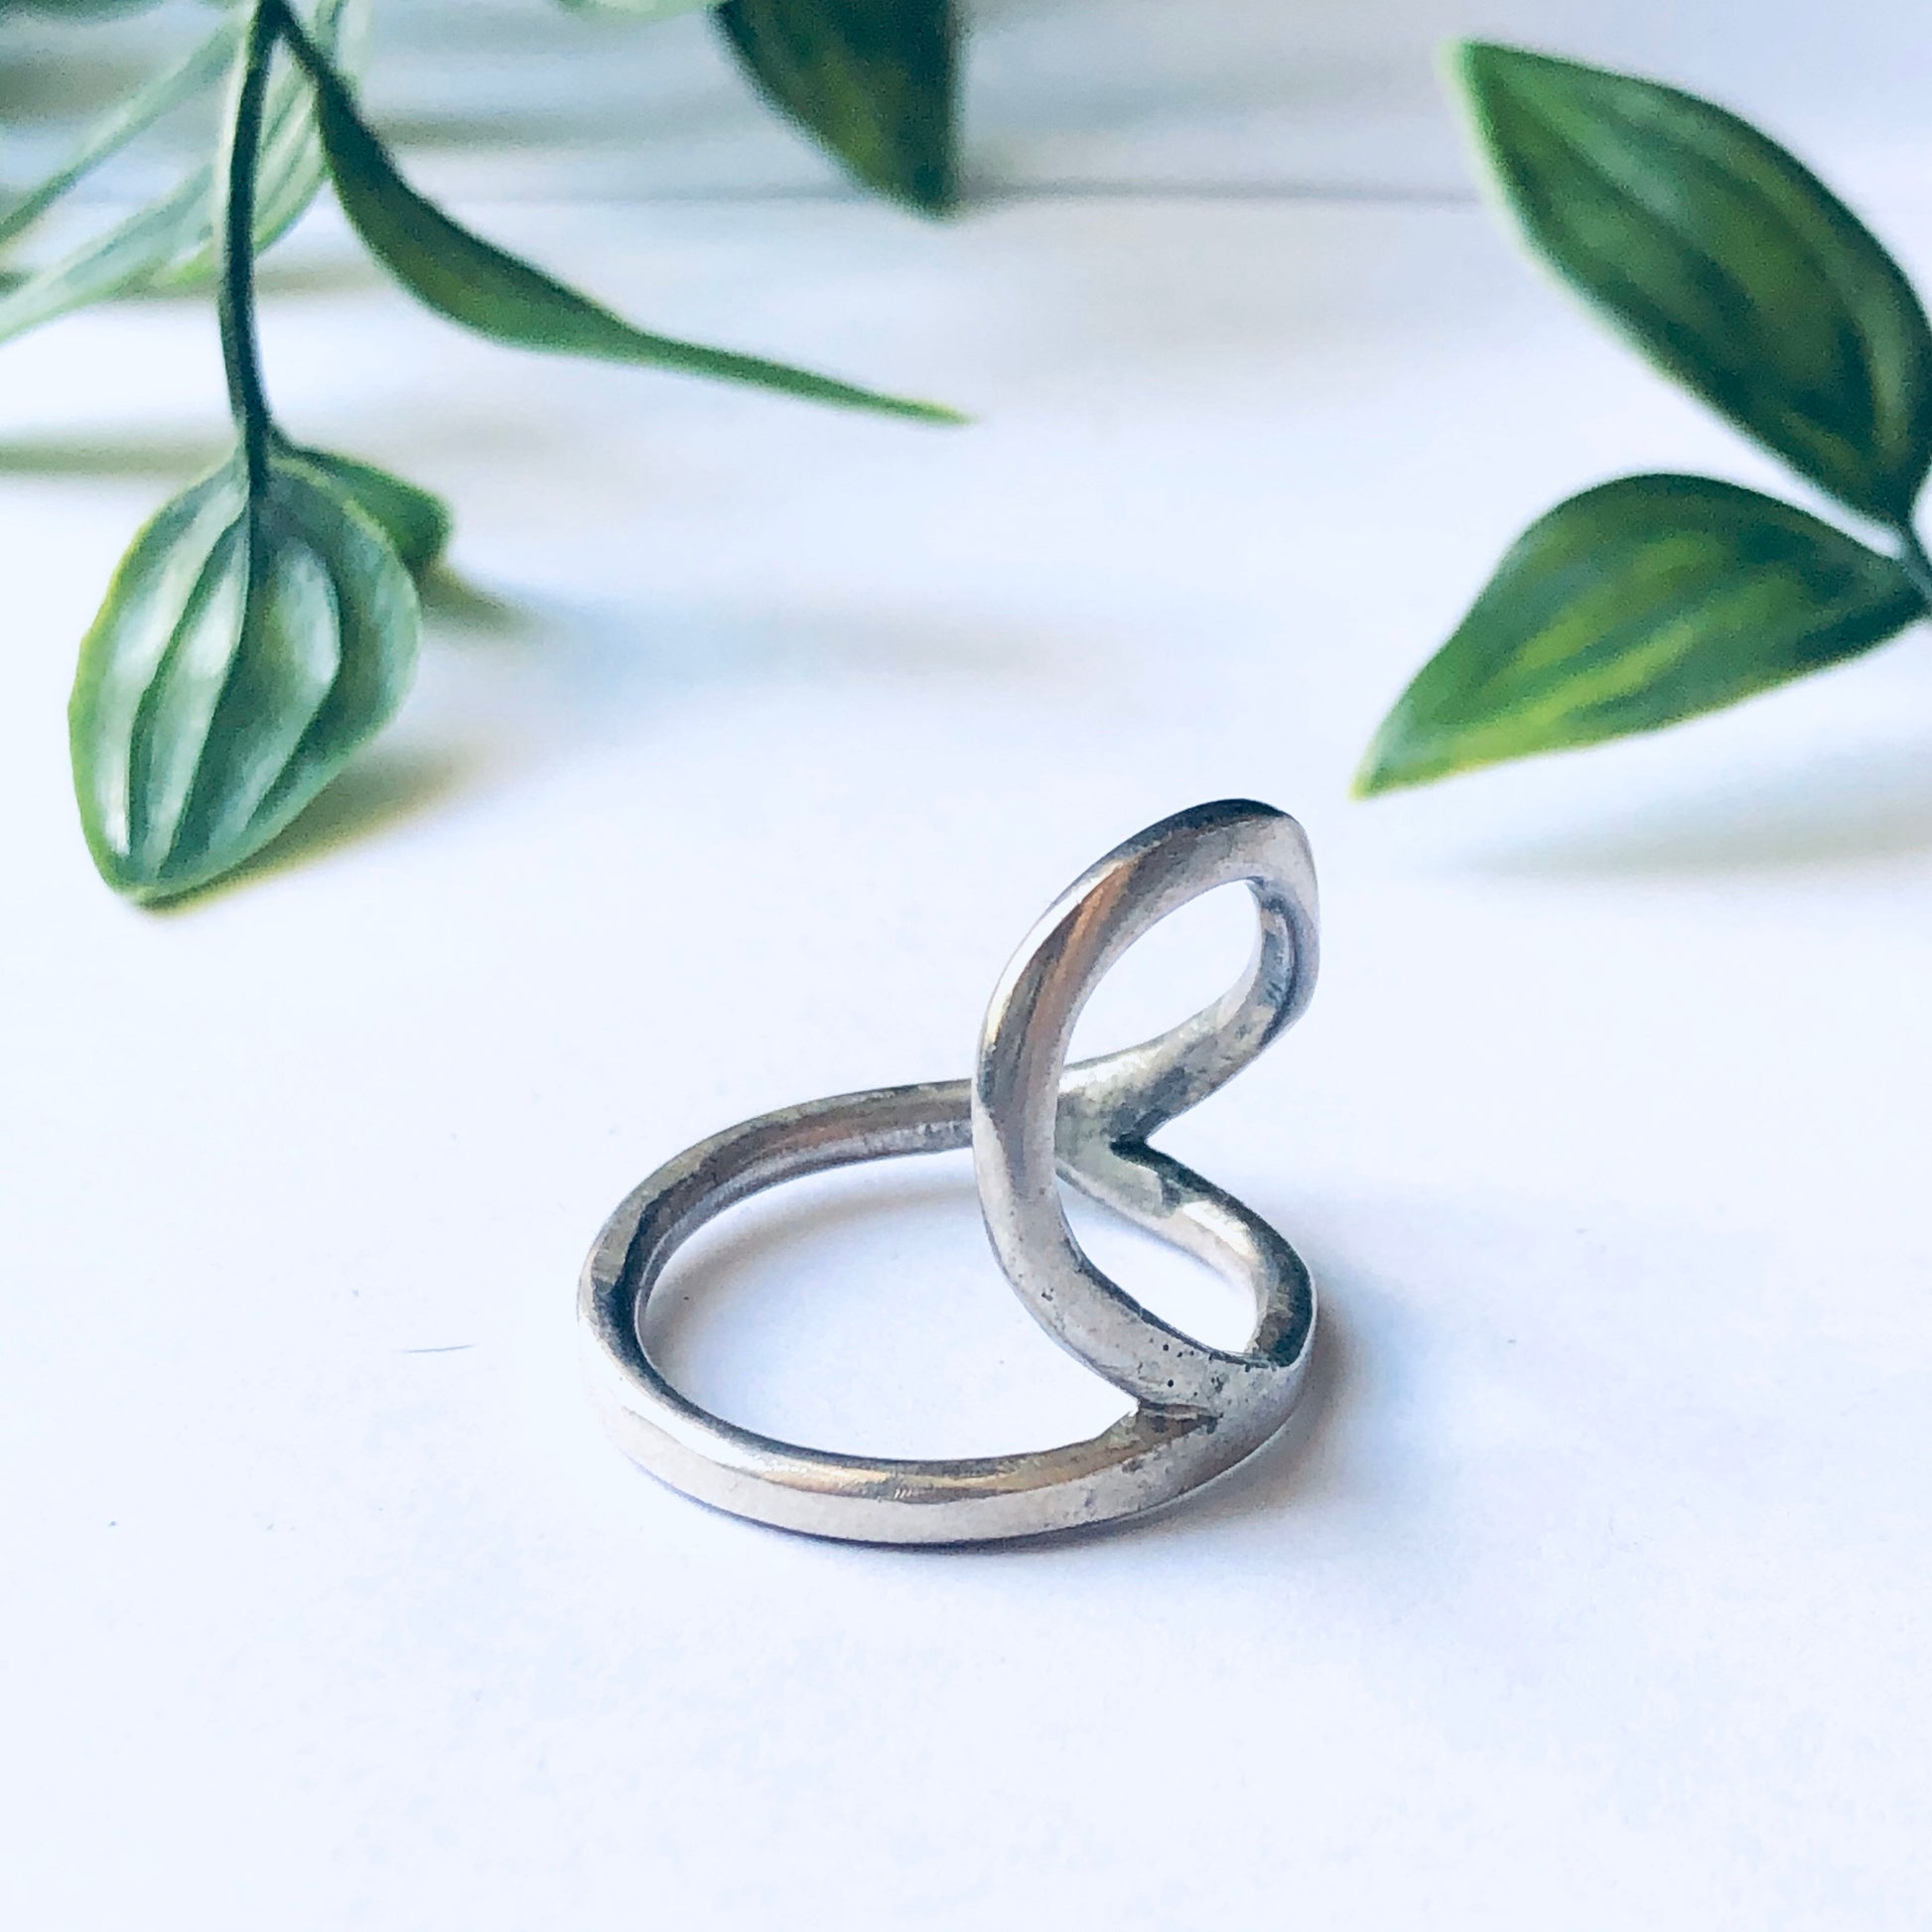 Vintage silver cut out ring with large minimalist abstract design displayed against a white background with green leaves.